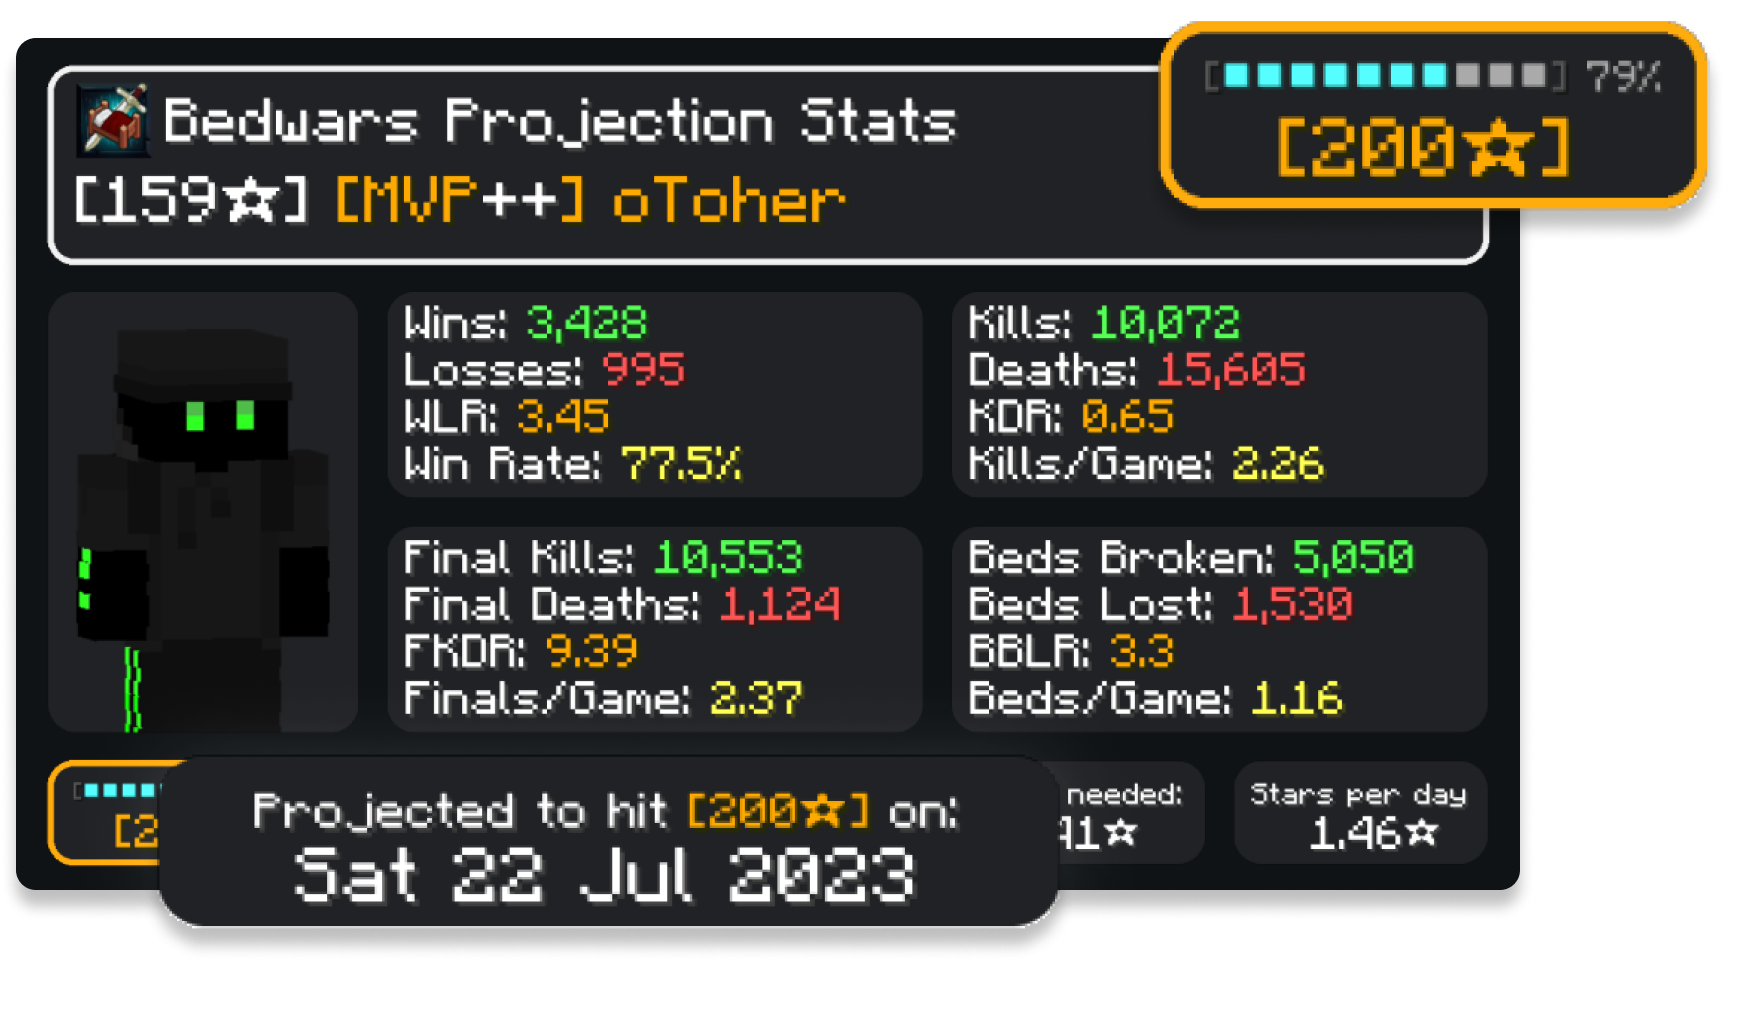 Polsu's prediction stats with the current experience and the projected date when the next milestone will be reached